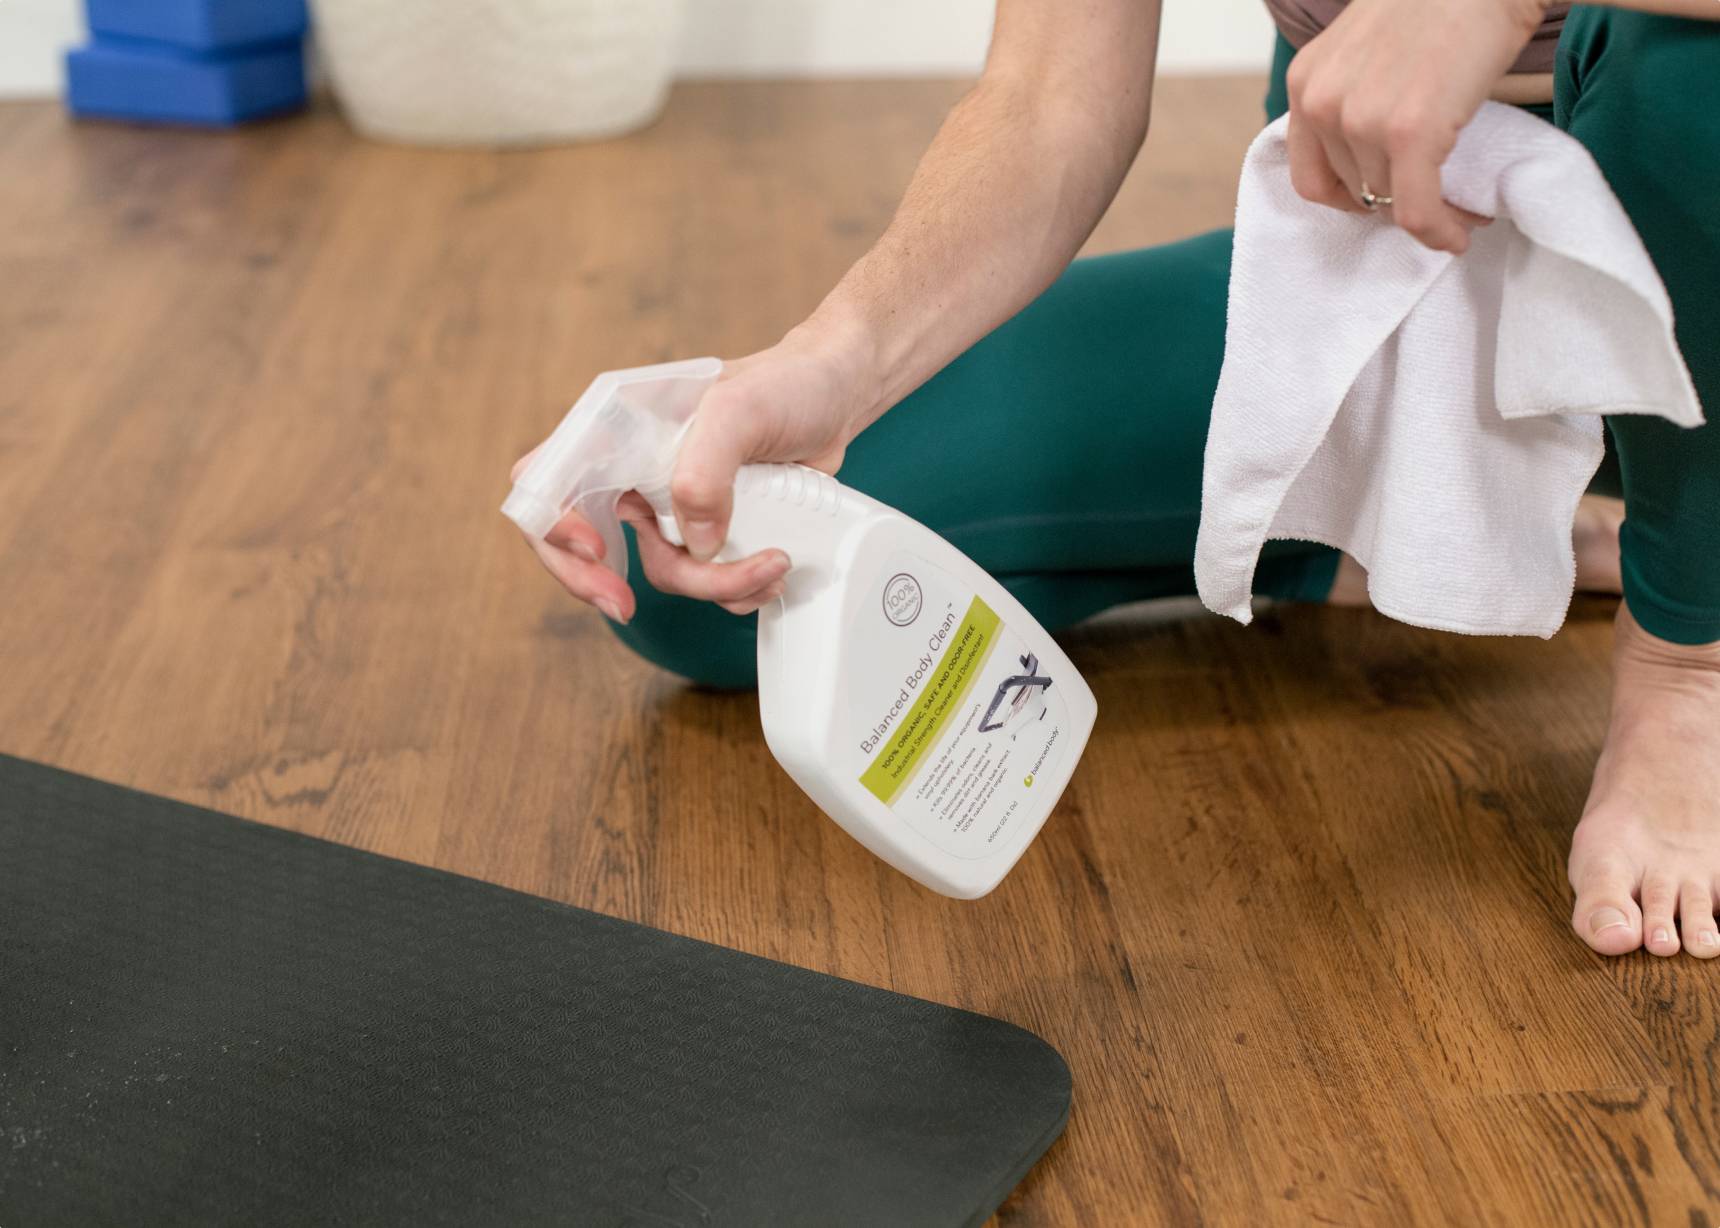 Person spraying Balanced Body Clean on a mat for hygiene.